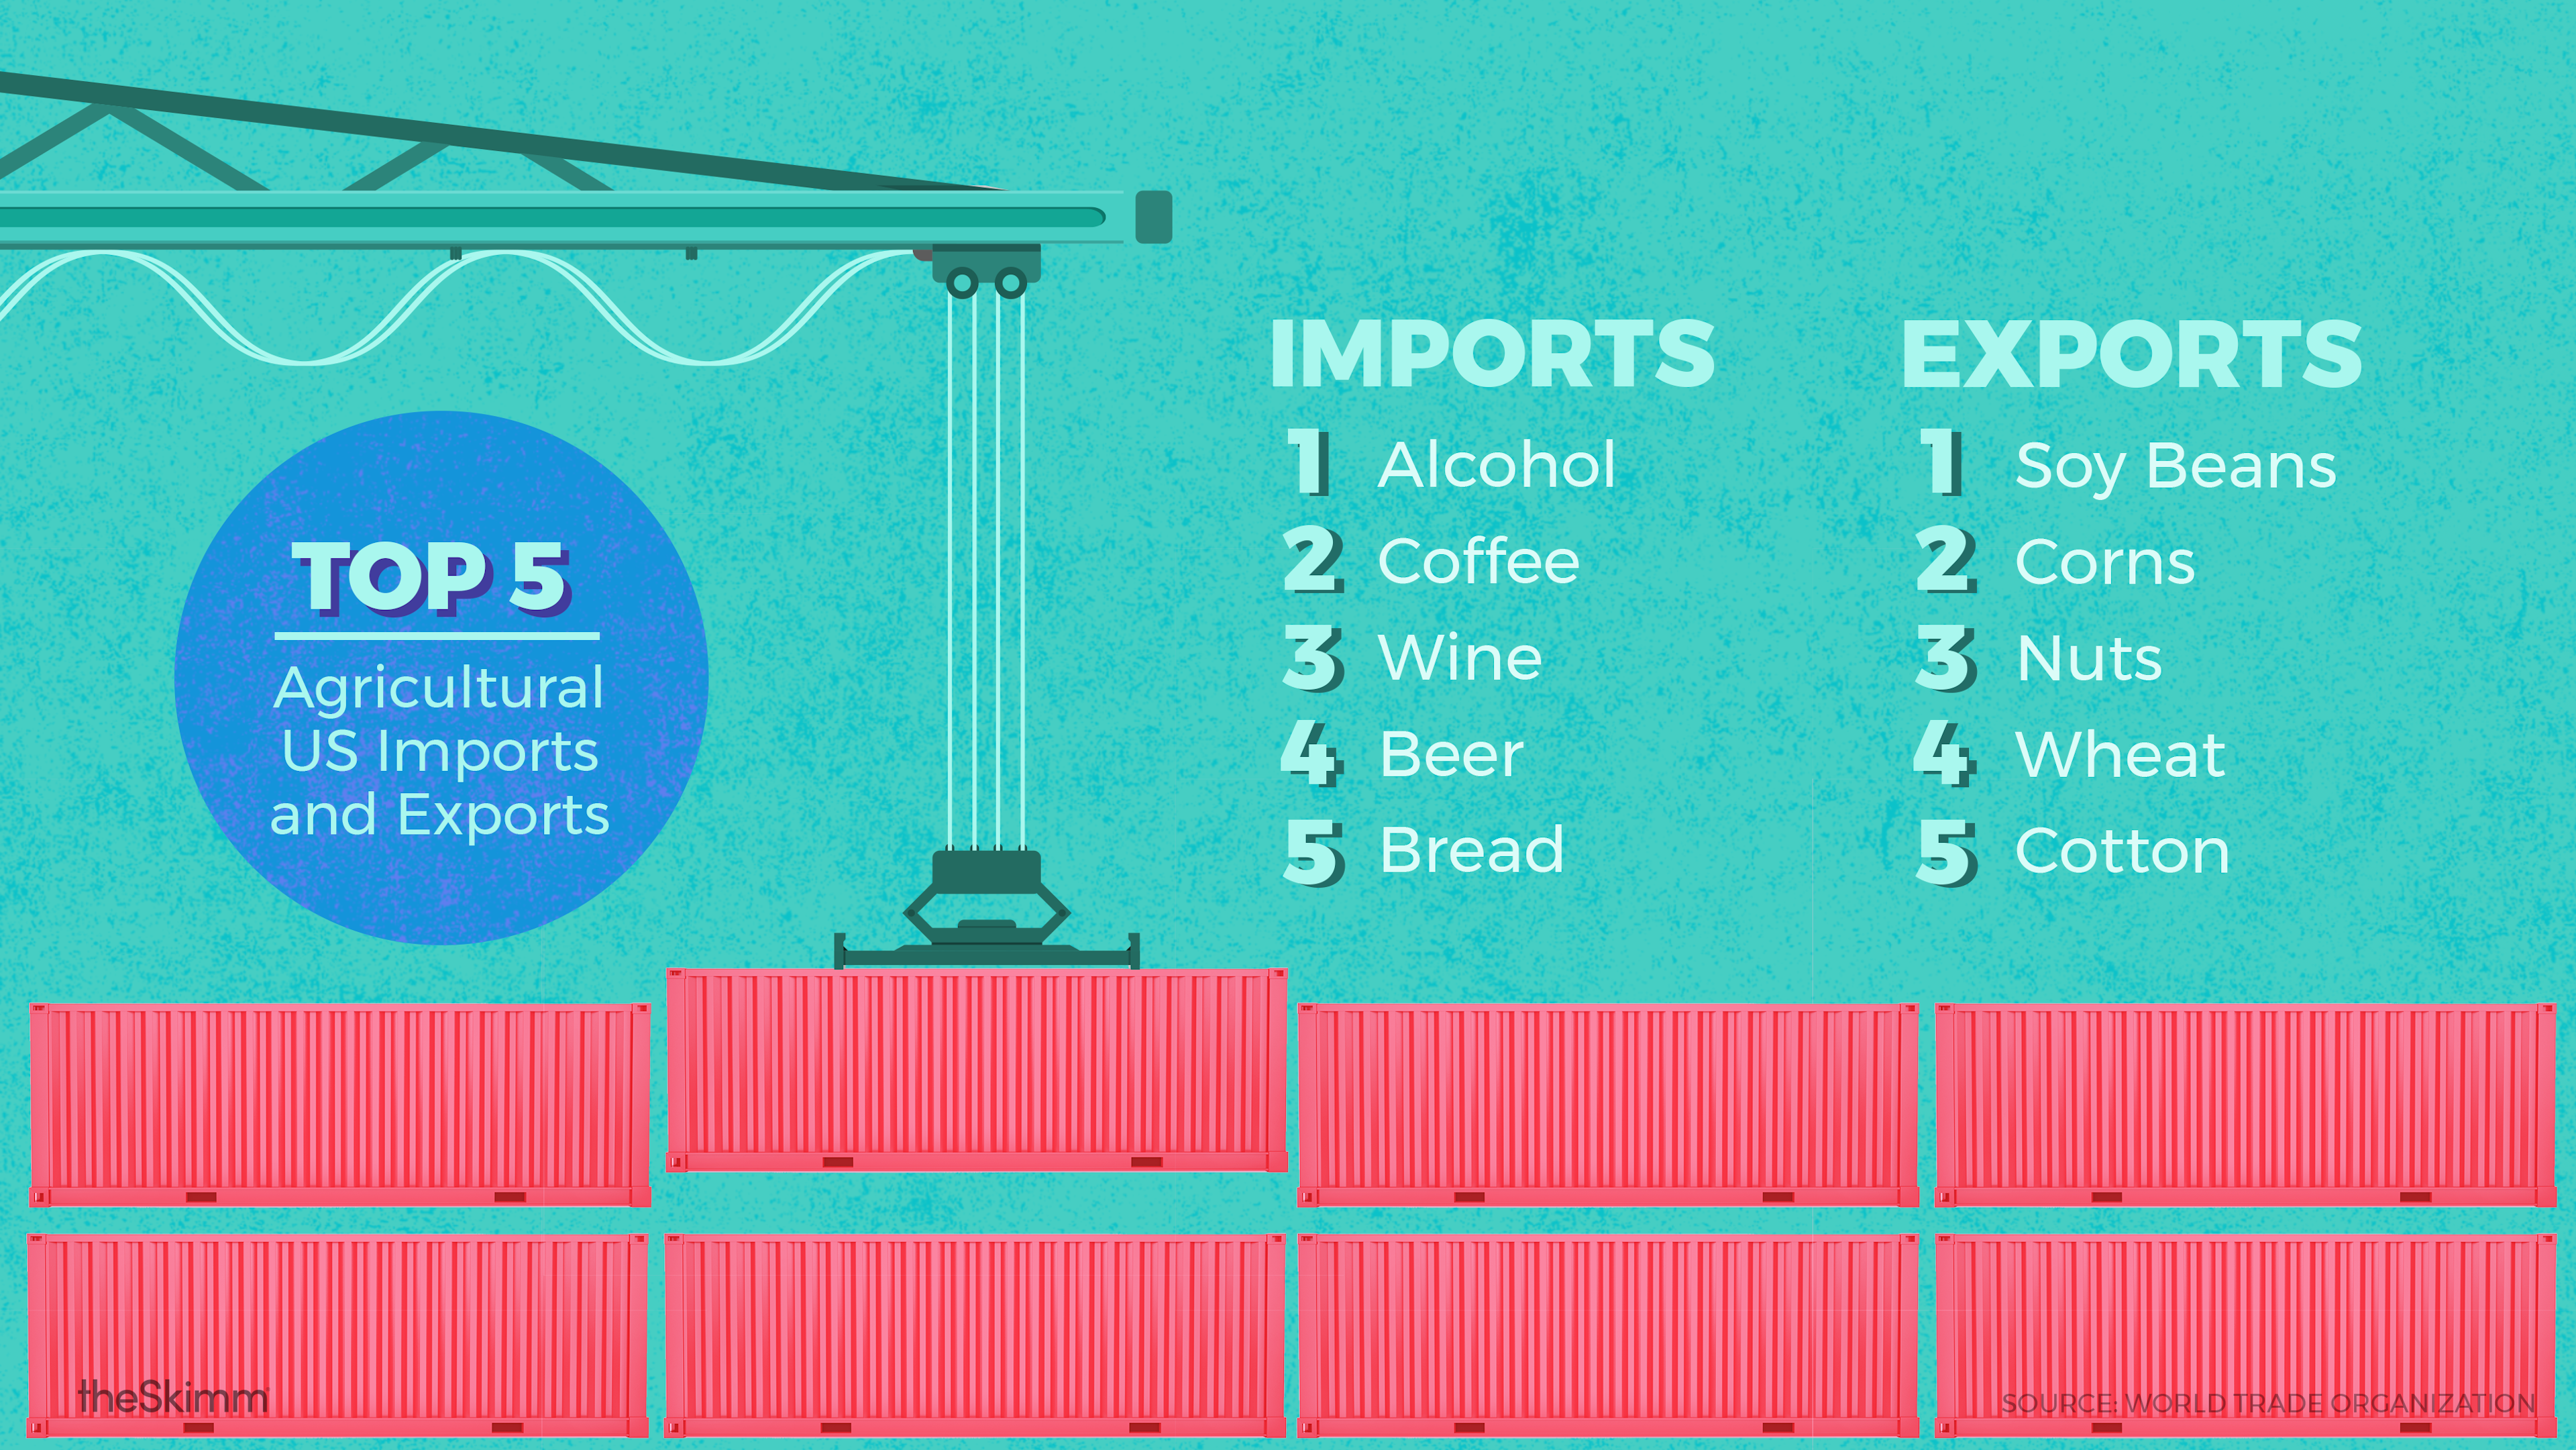 Top 5 Agricultural US Imports: Alcohol, Coffee, Wine, Beer and Bread. Top 5 Agricultural US Exports: Soy Beans, Corn, Nuts, Wheat and Cotton